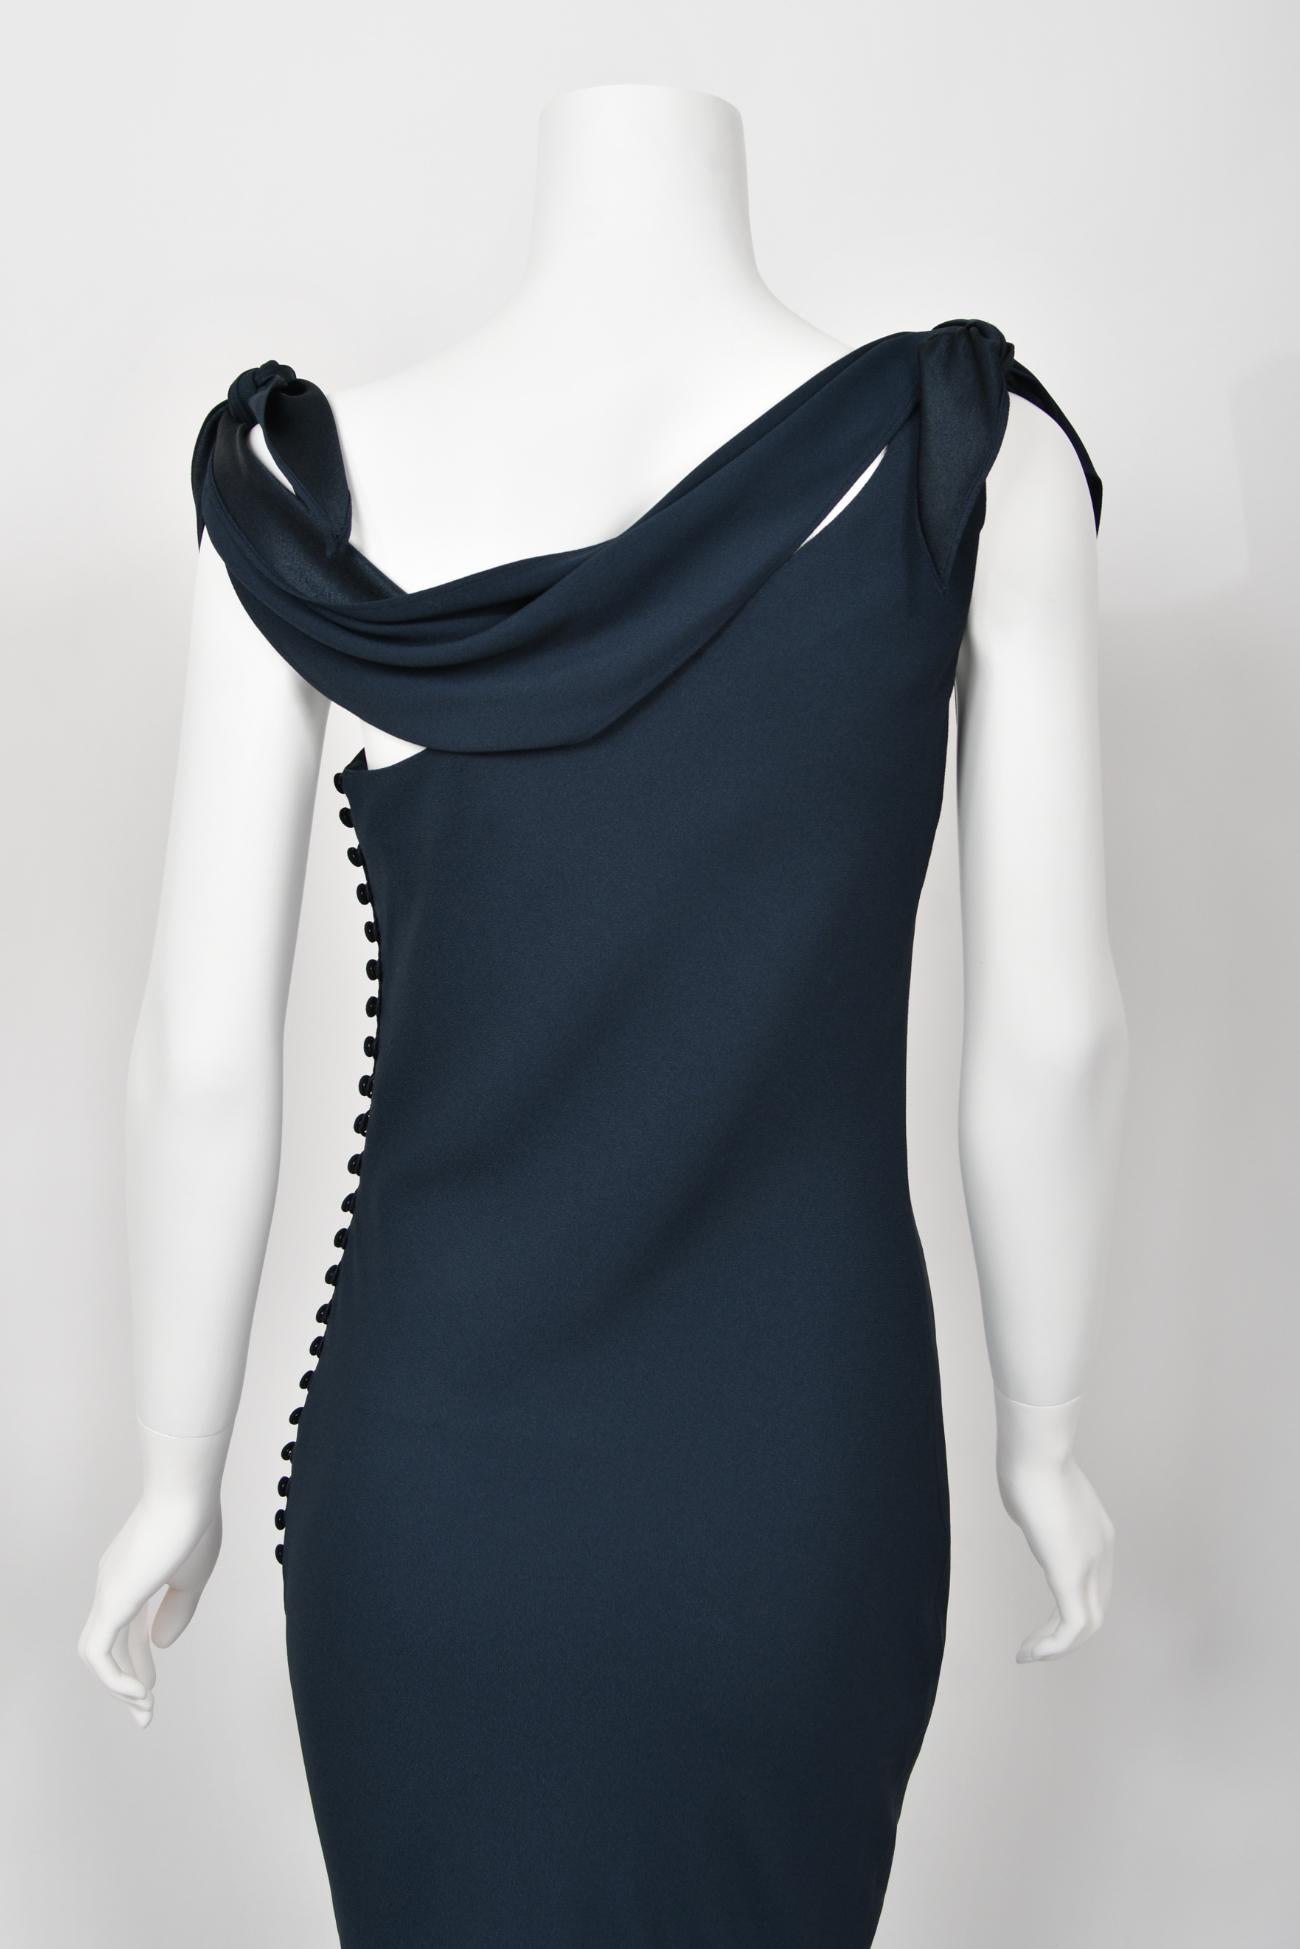 1998 Christian Dior by John Galliano Navy Blue Silk Draped Bias-Cut Evening Gown For Sale 8